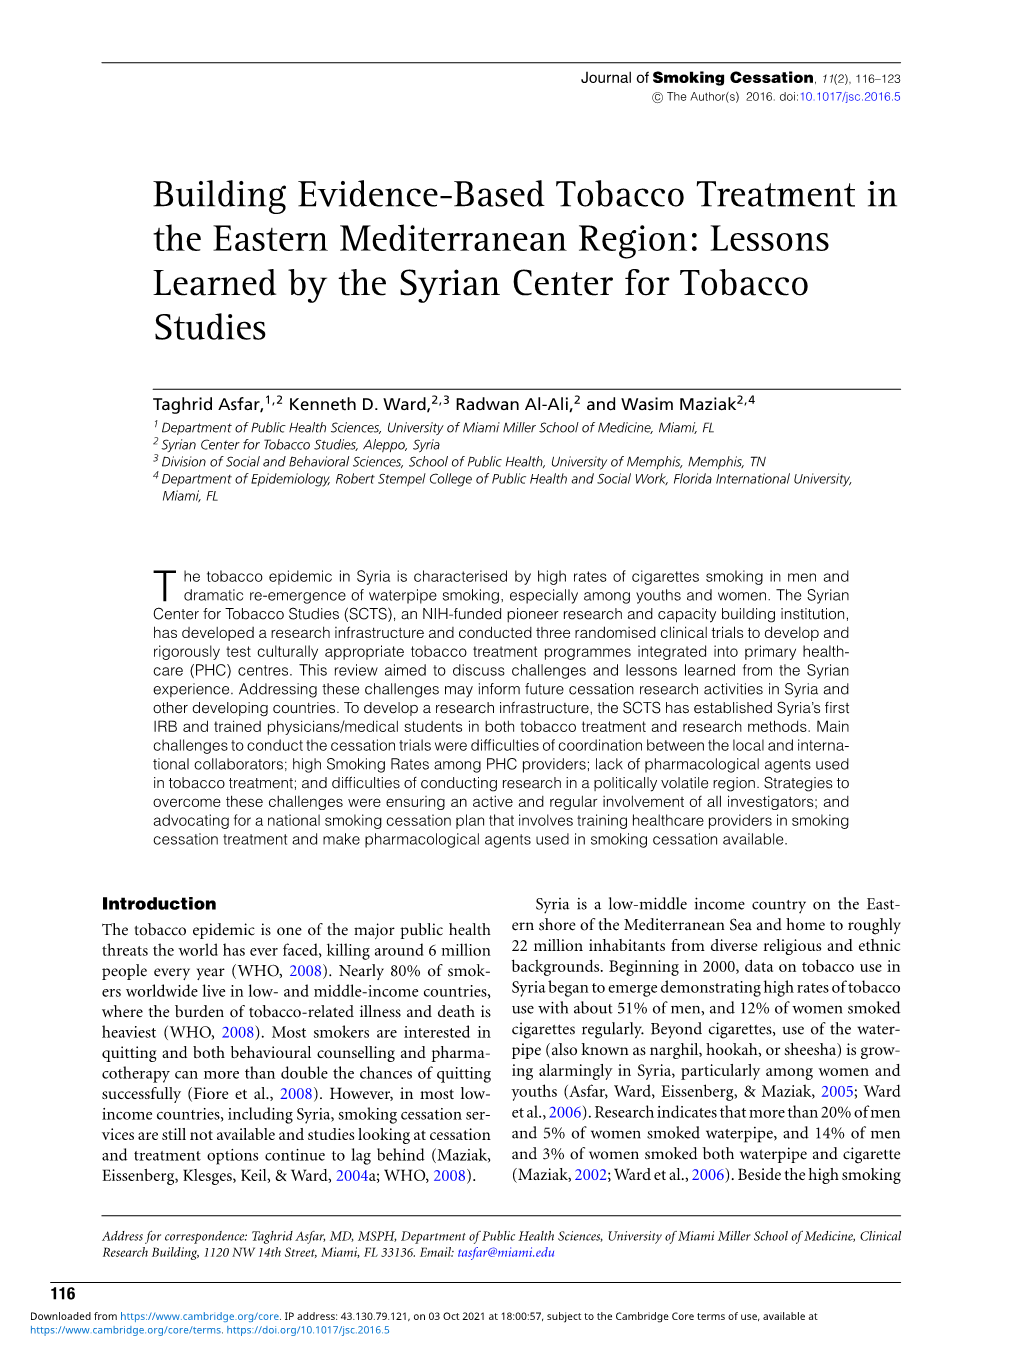 Building Evidence-Based Tobacco Treatment in the Eastern Mediterranean Region: Lessons Learned by the Syrian Center for Tobacco Studies